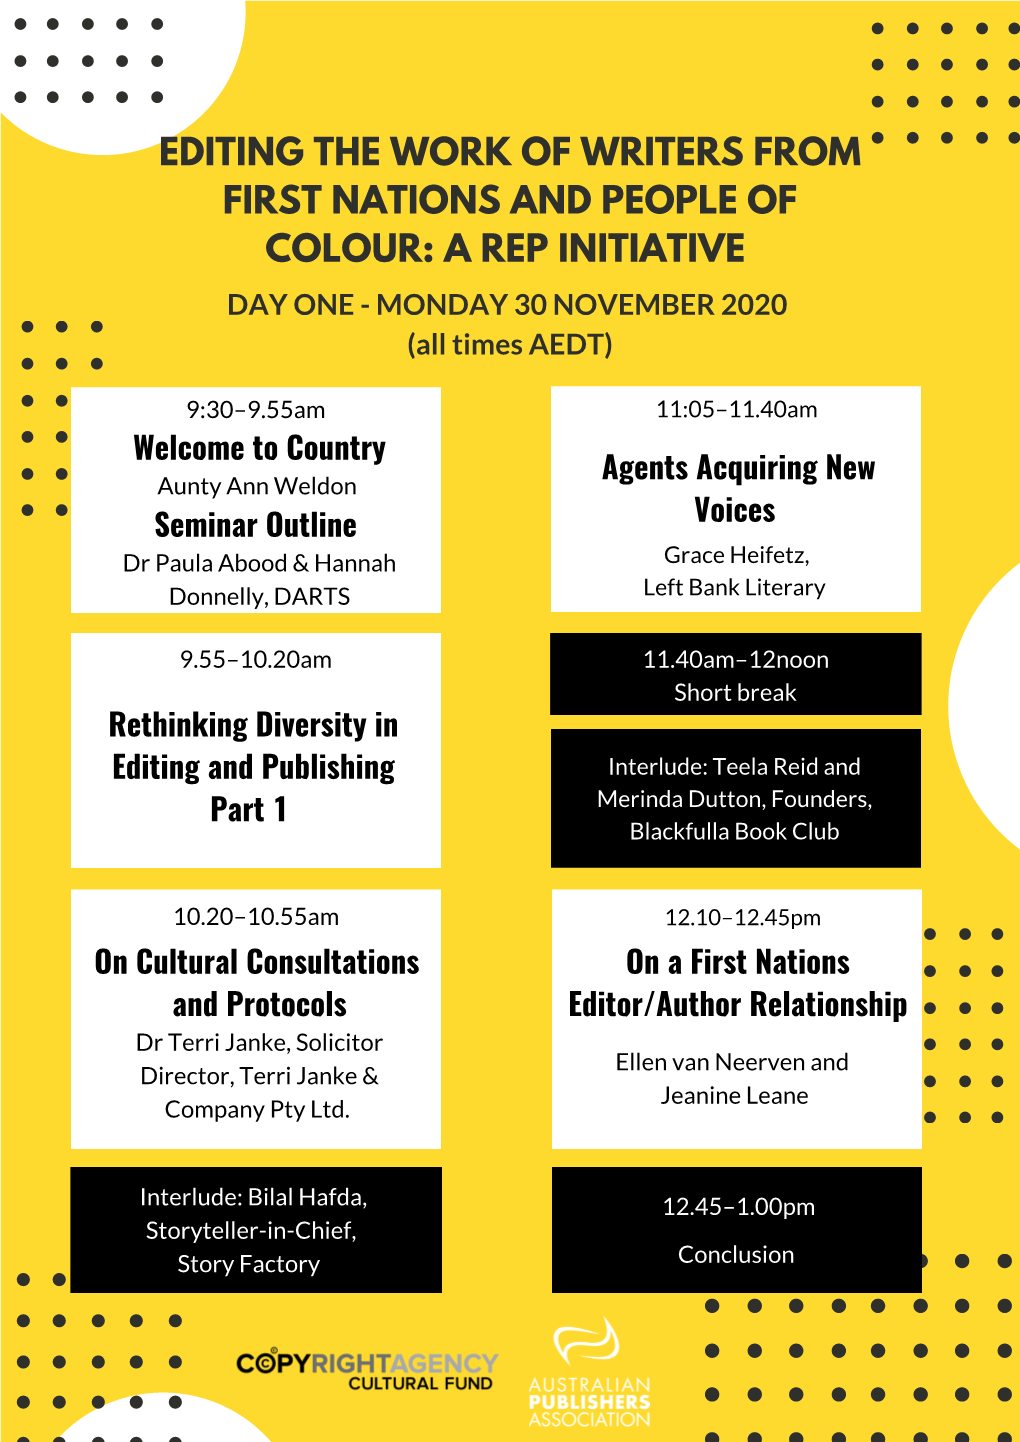 EDITING the WORK of WRITERS from FIRST NATIONS and PEOPLE of COLOUR: a REP INITIATIVE DAY ONE - MONDAY 30 NOVEMBER 2020 (All Times AEDT)